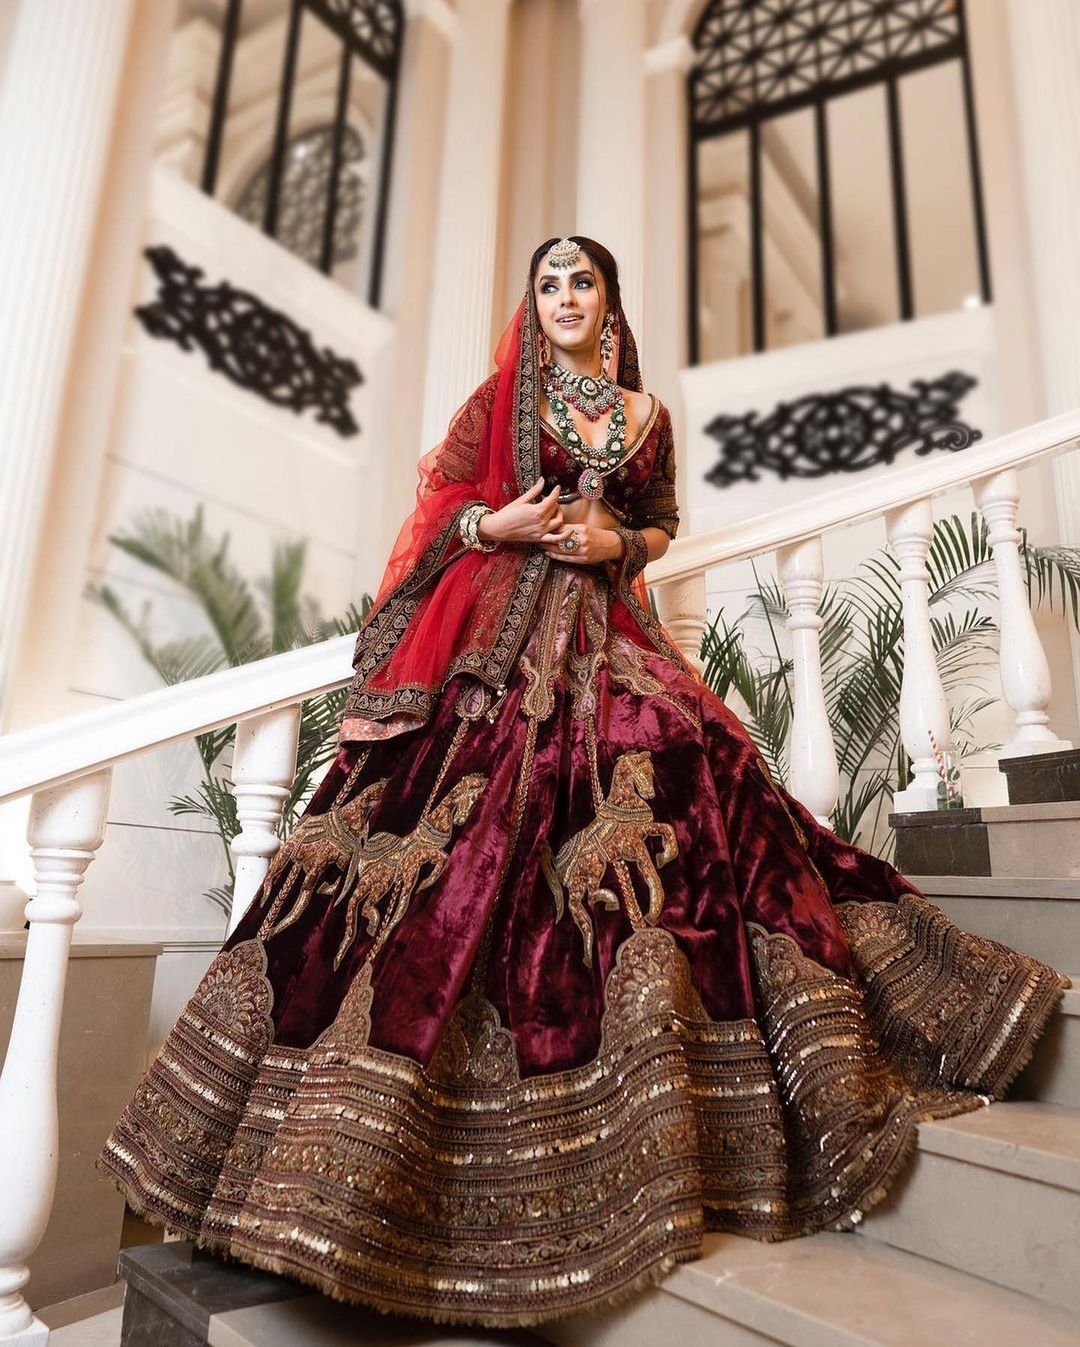 Maroon Colored Bridal Velvet material Lehenga Choli With Embroidery Wo –  𝐋𝐎𝐎𝐊𝐒 𝐀𝐍𝐃 𝐋𝐈𝐊𝐄𝐒